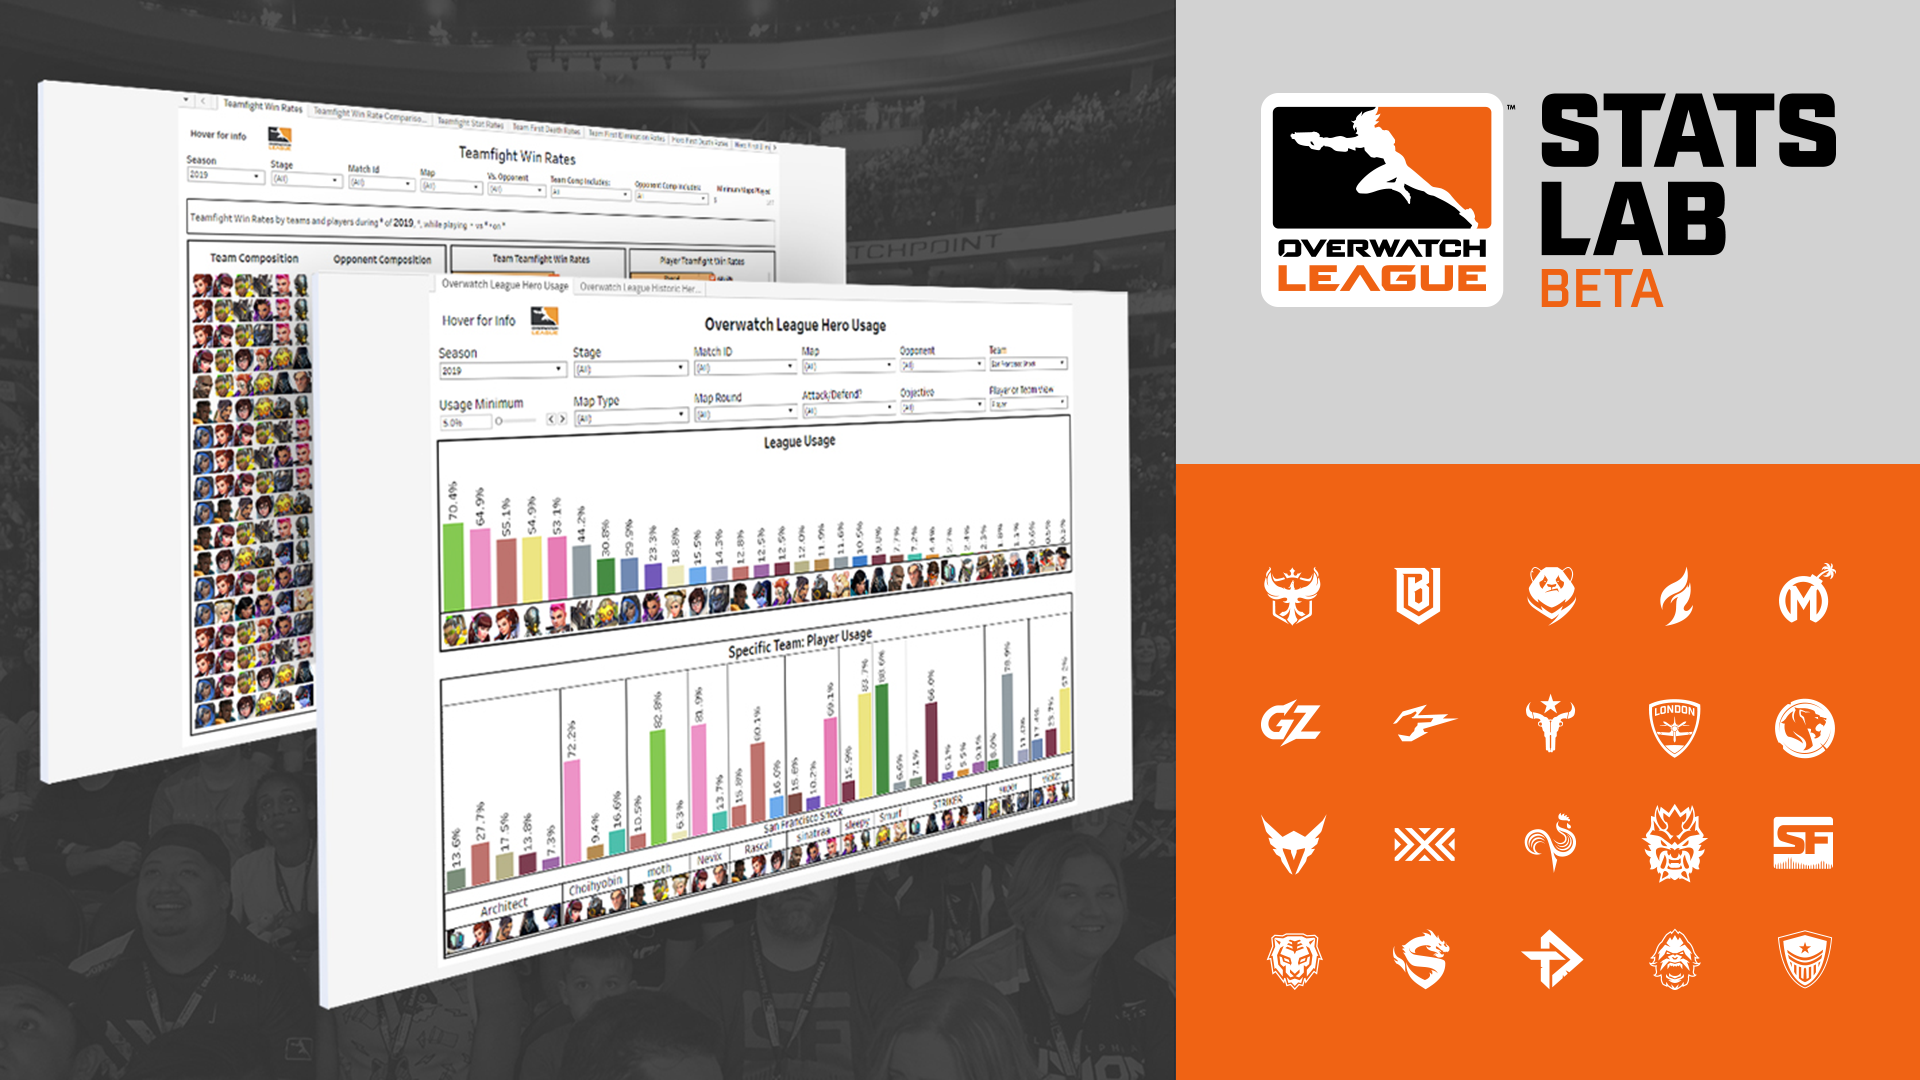 Get the price history of games, active player stats and more on